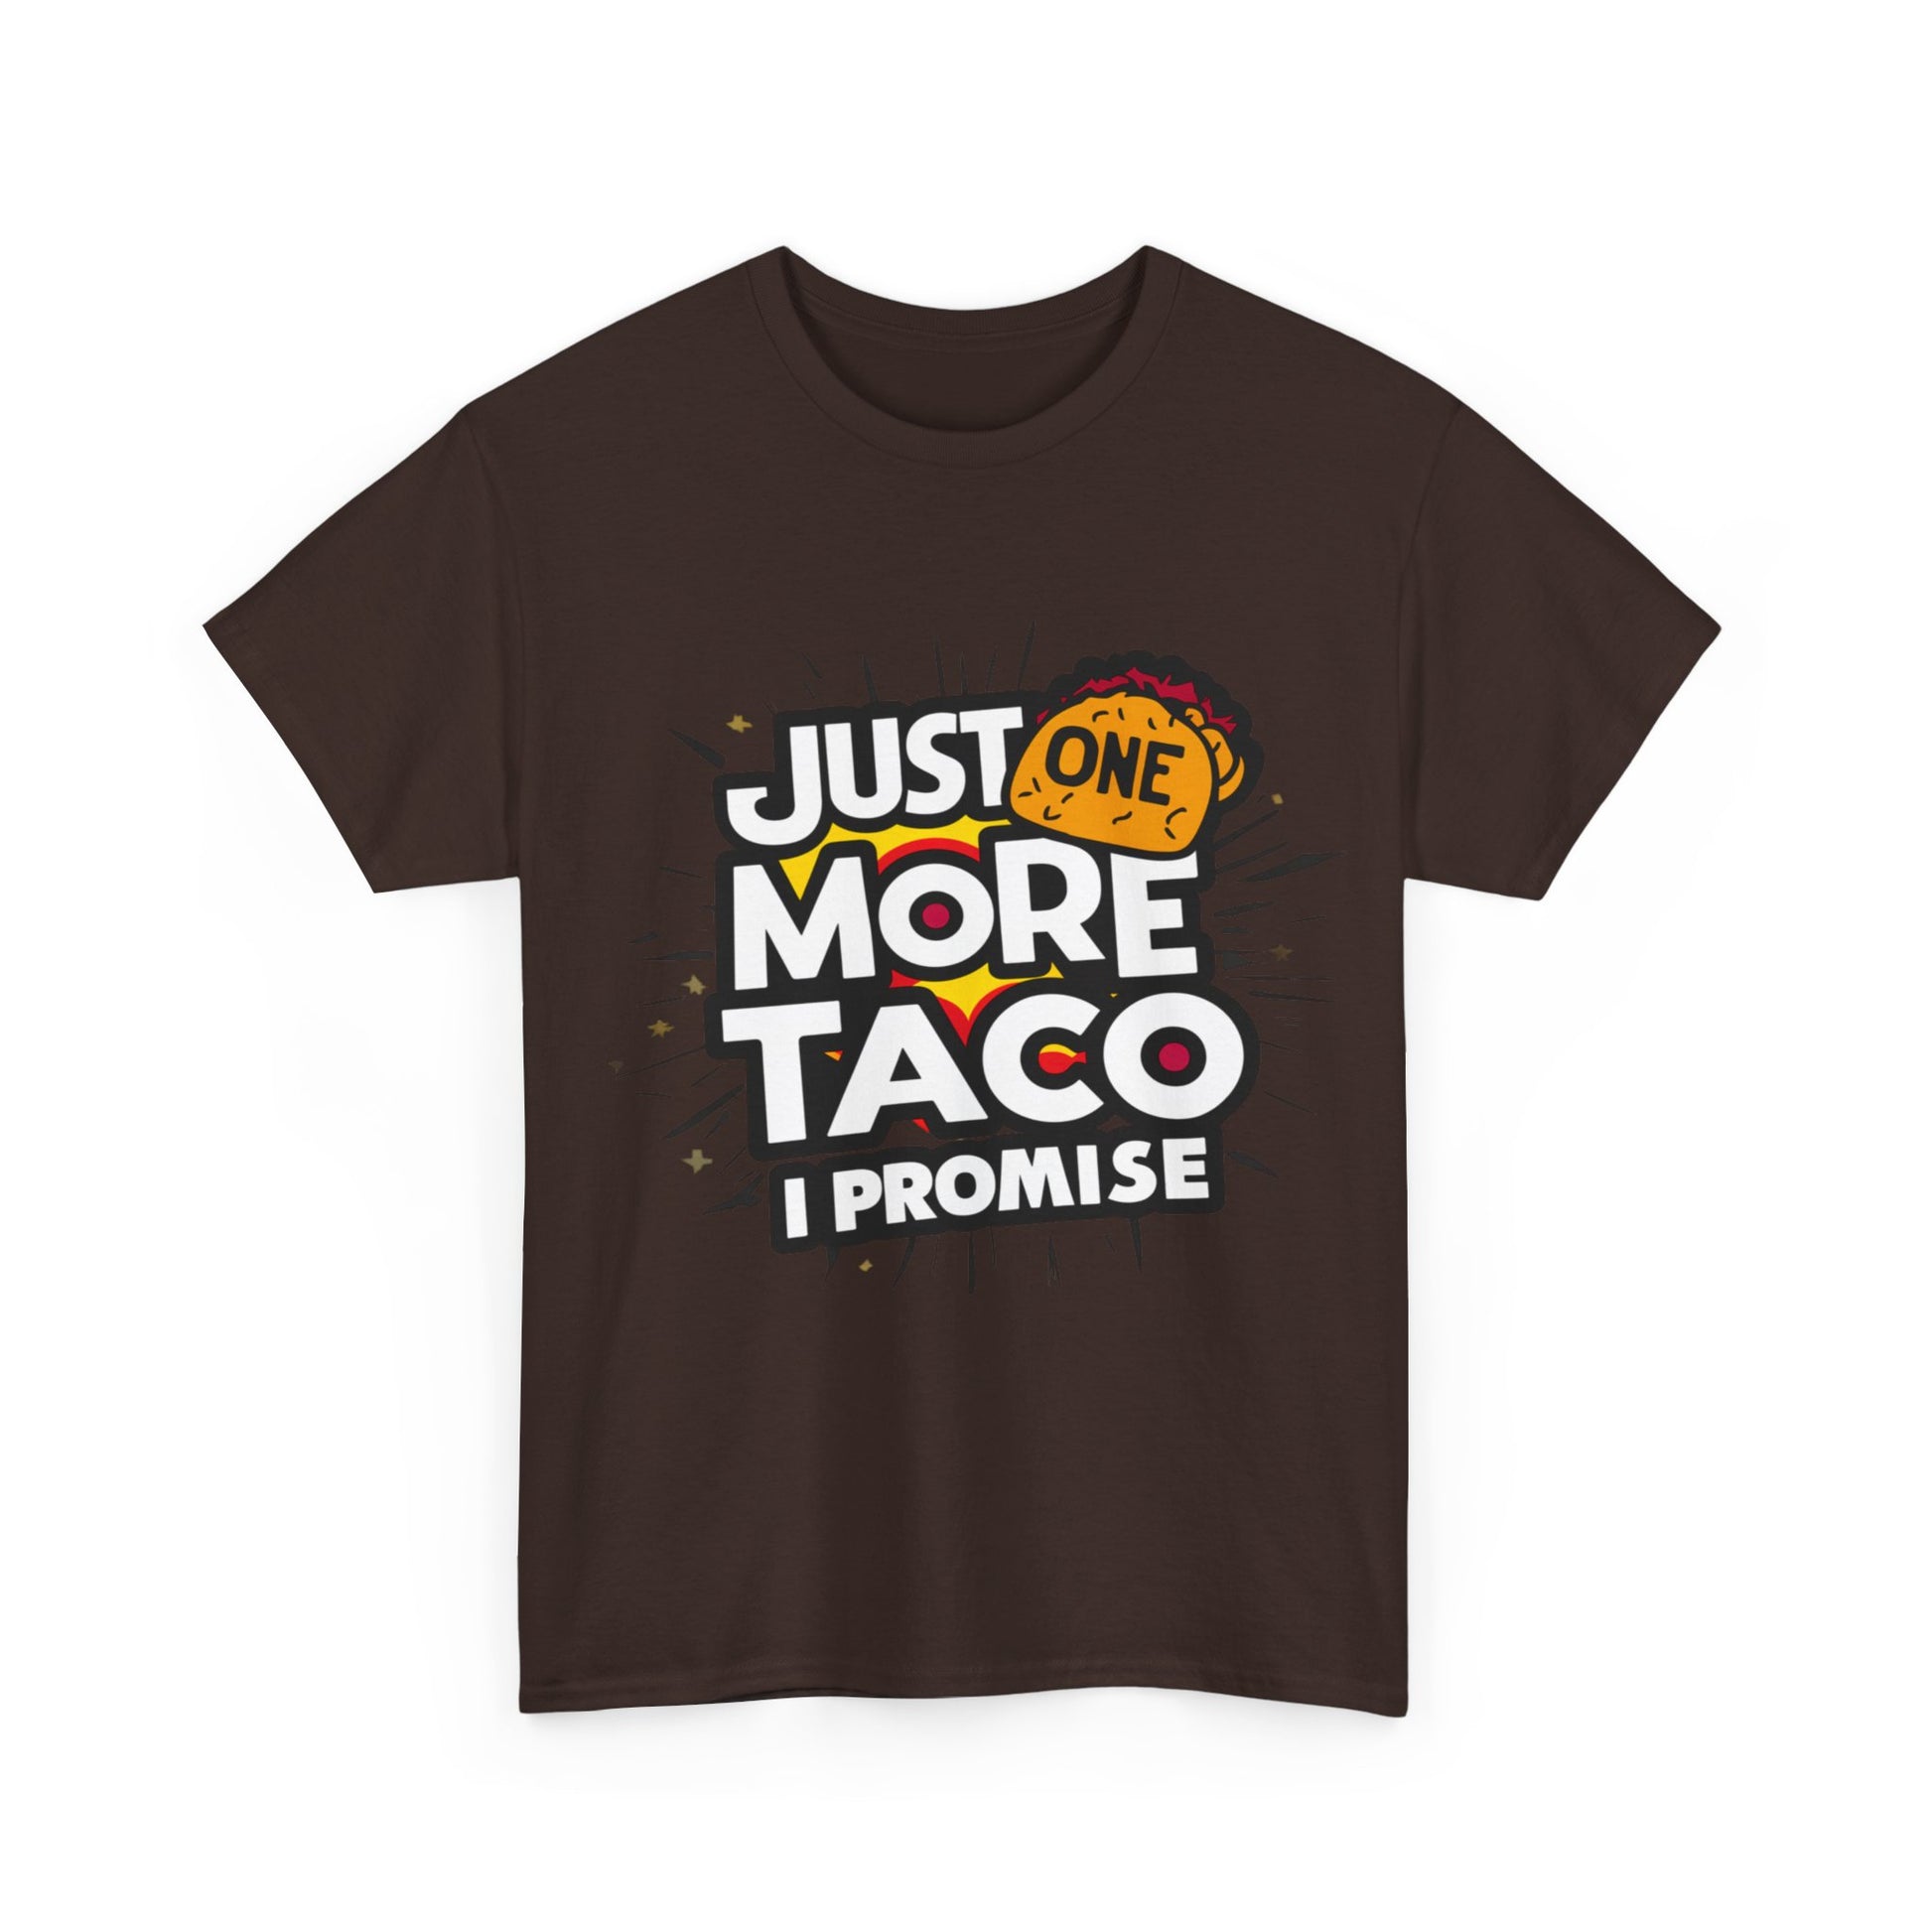 Copy of Just One More Taco I Promise Mexican Food Graphic Unisex Heavy Cotton Tee Cotton Funny Humorous Graphic Soft Premium Unisex Men Women Dark Chocolate T-shirt Birthday Gift-21